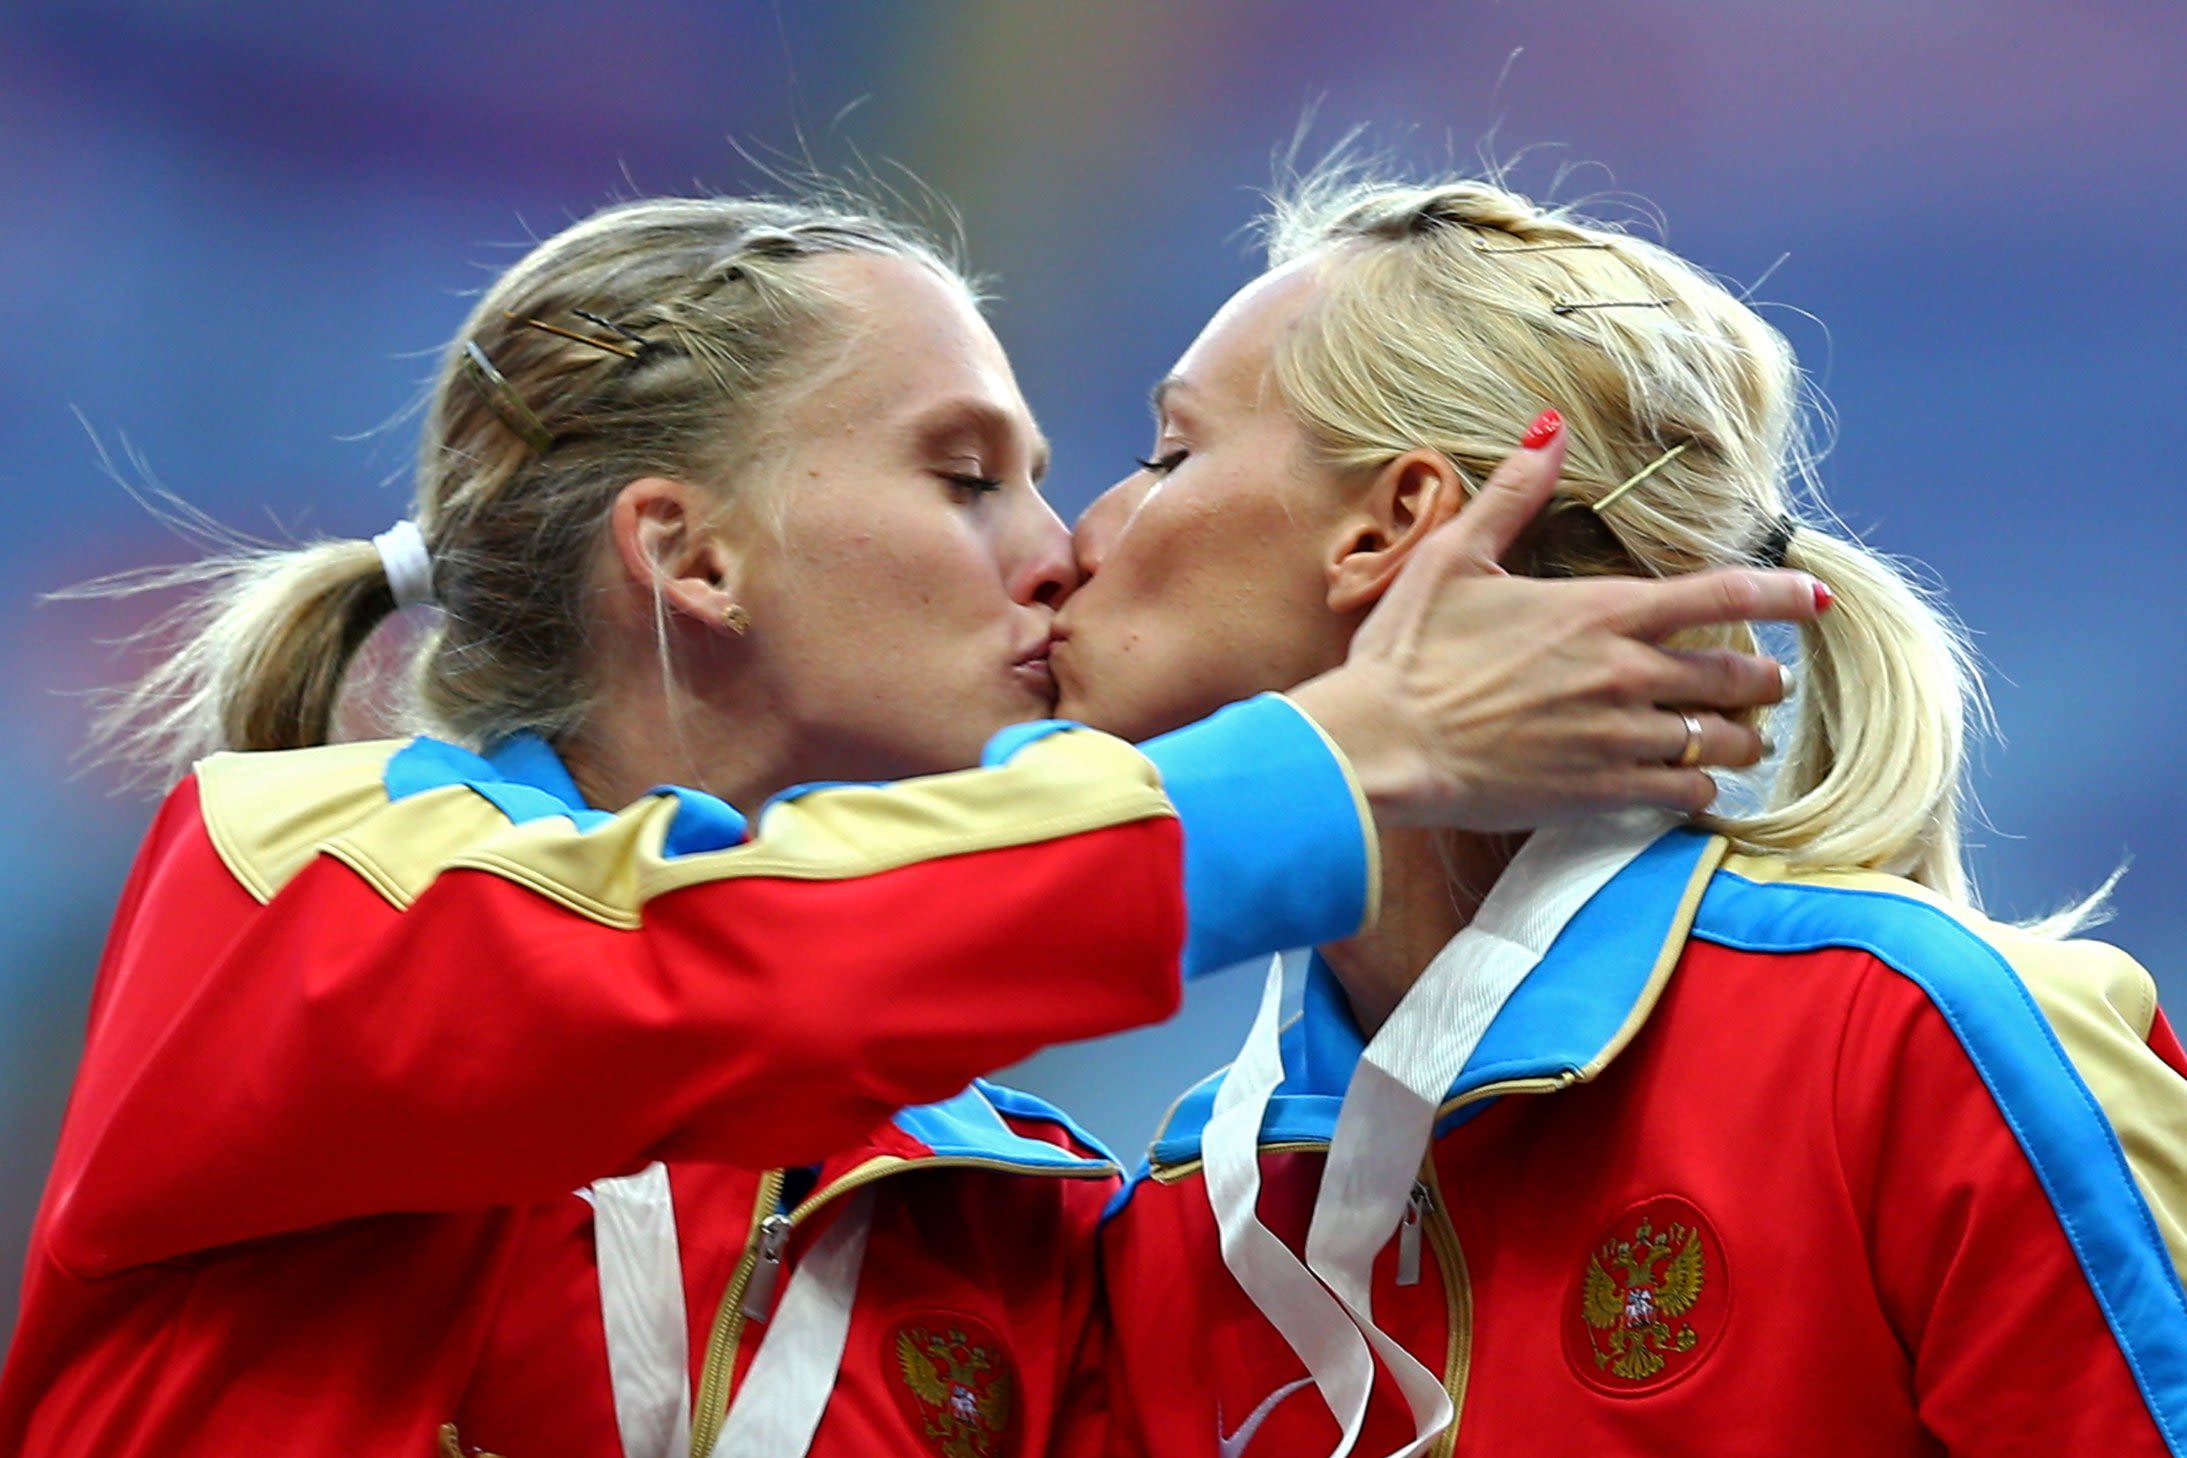 Relay Red Xxx Videos - Russian runners kiss on the winners podium at competition in Moscow | CNN